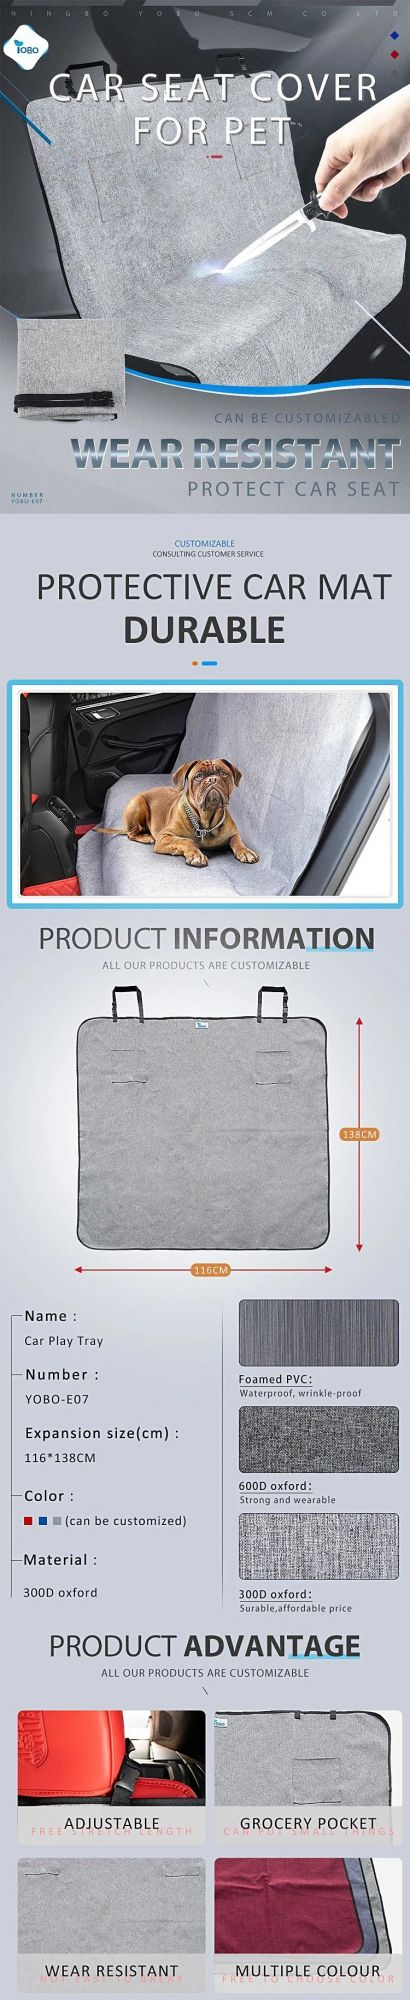 Dog Seat Cover for Back Seat, 100% Waterproof Dog Car Seat Covers with Mesh Window, Scratch Prevent